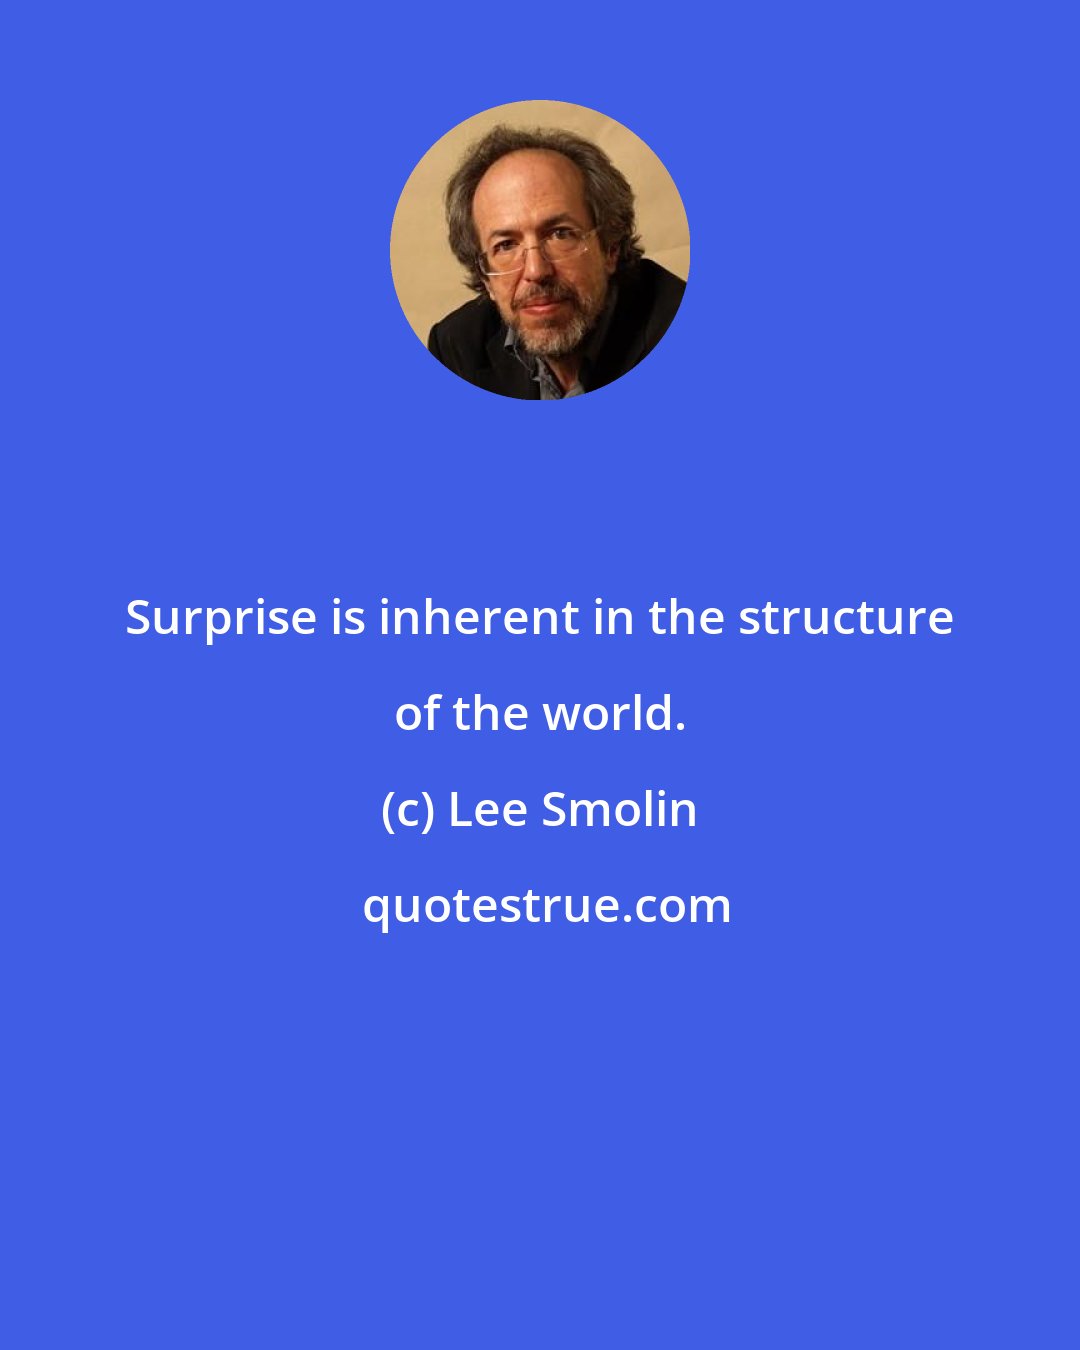 Lee Smolin: Surprise is inherent in the structure of the world.